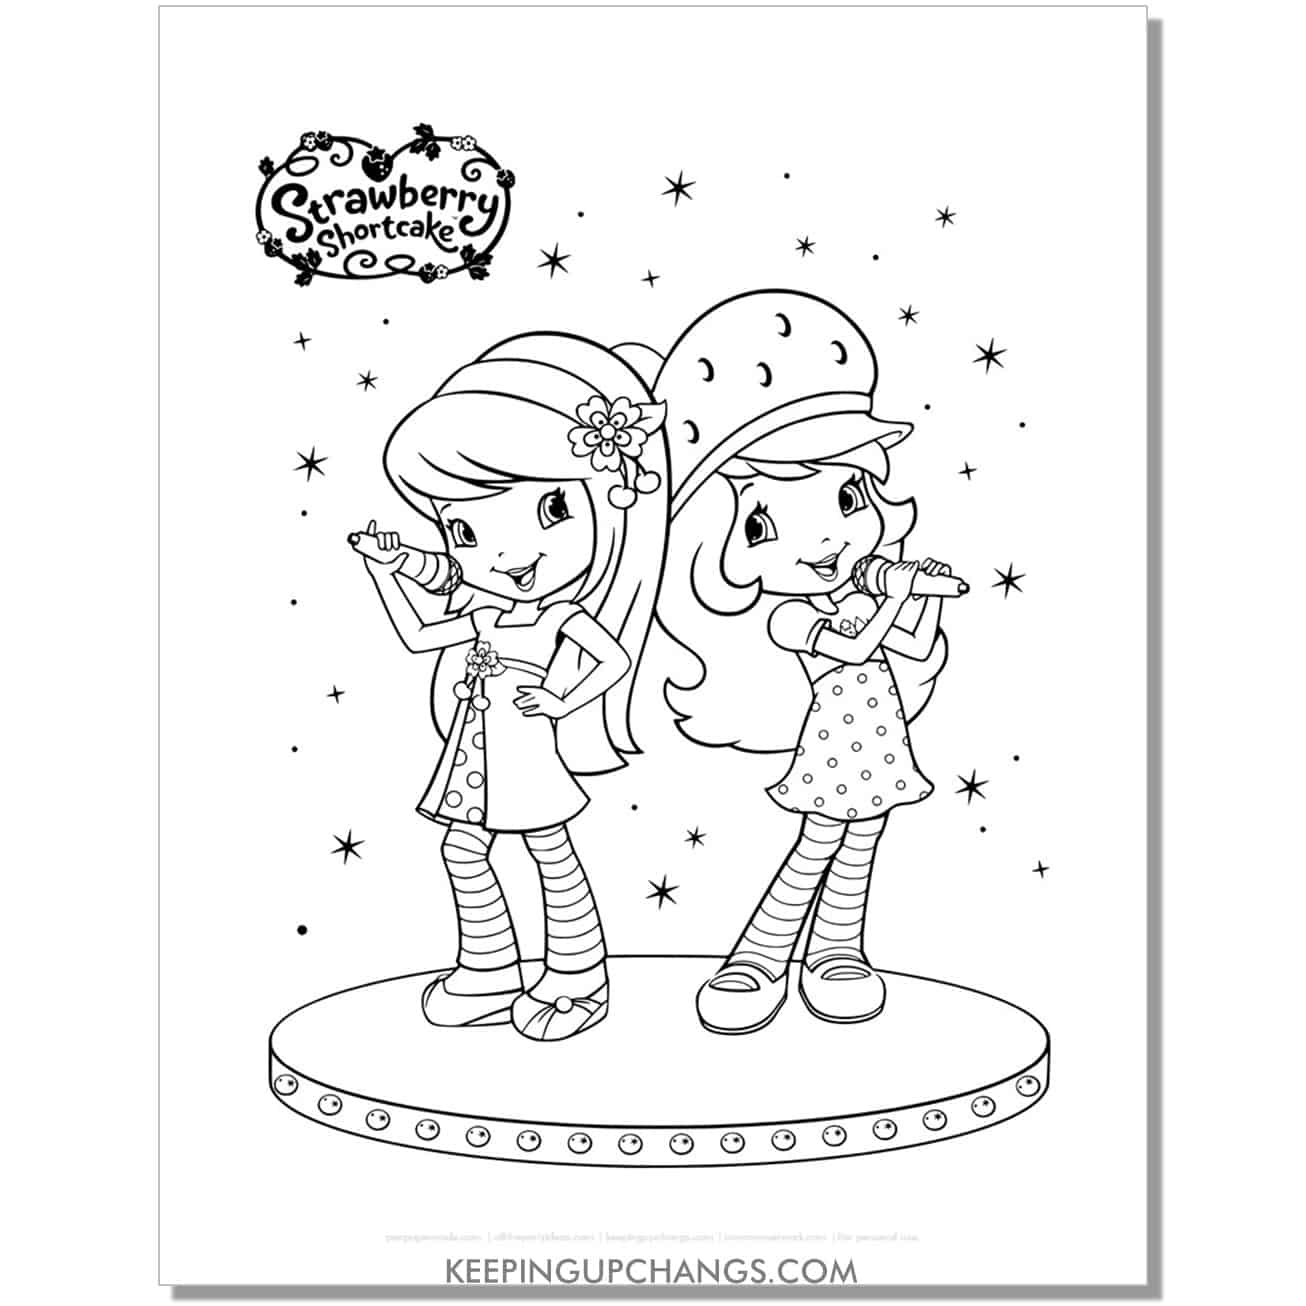 free cherry jam and strawberry shortcake coloring page, sheet.